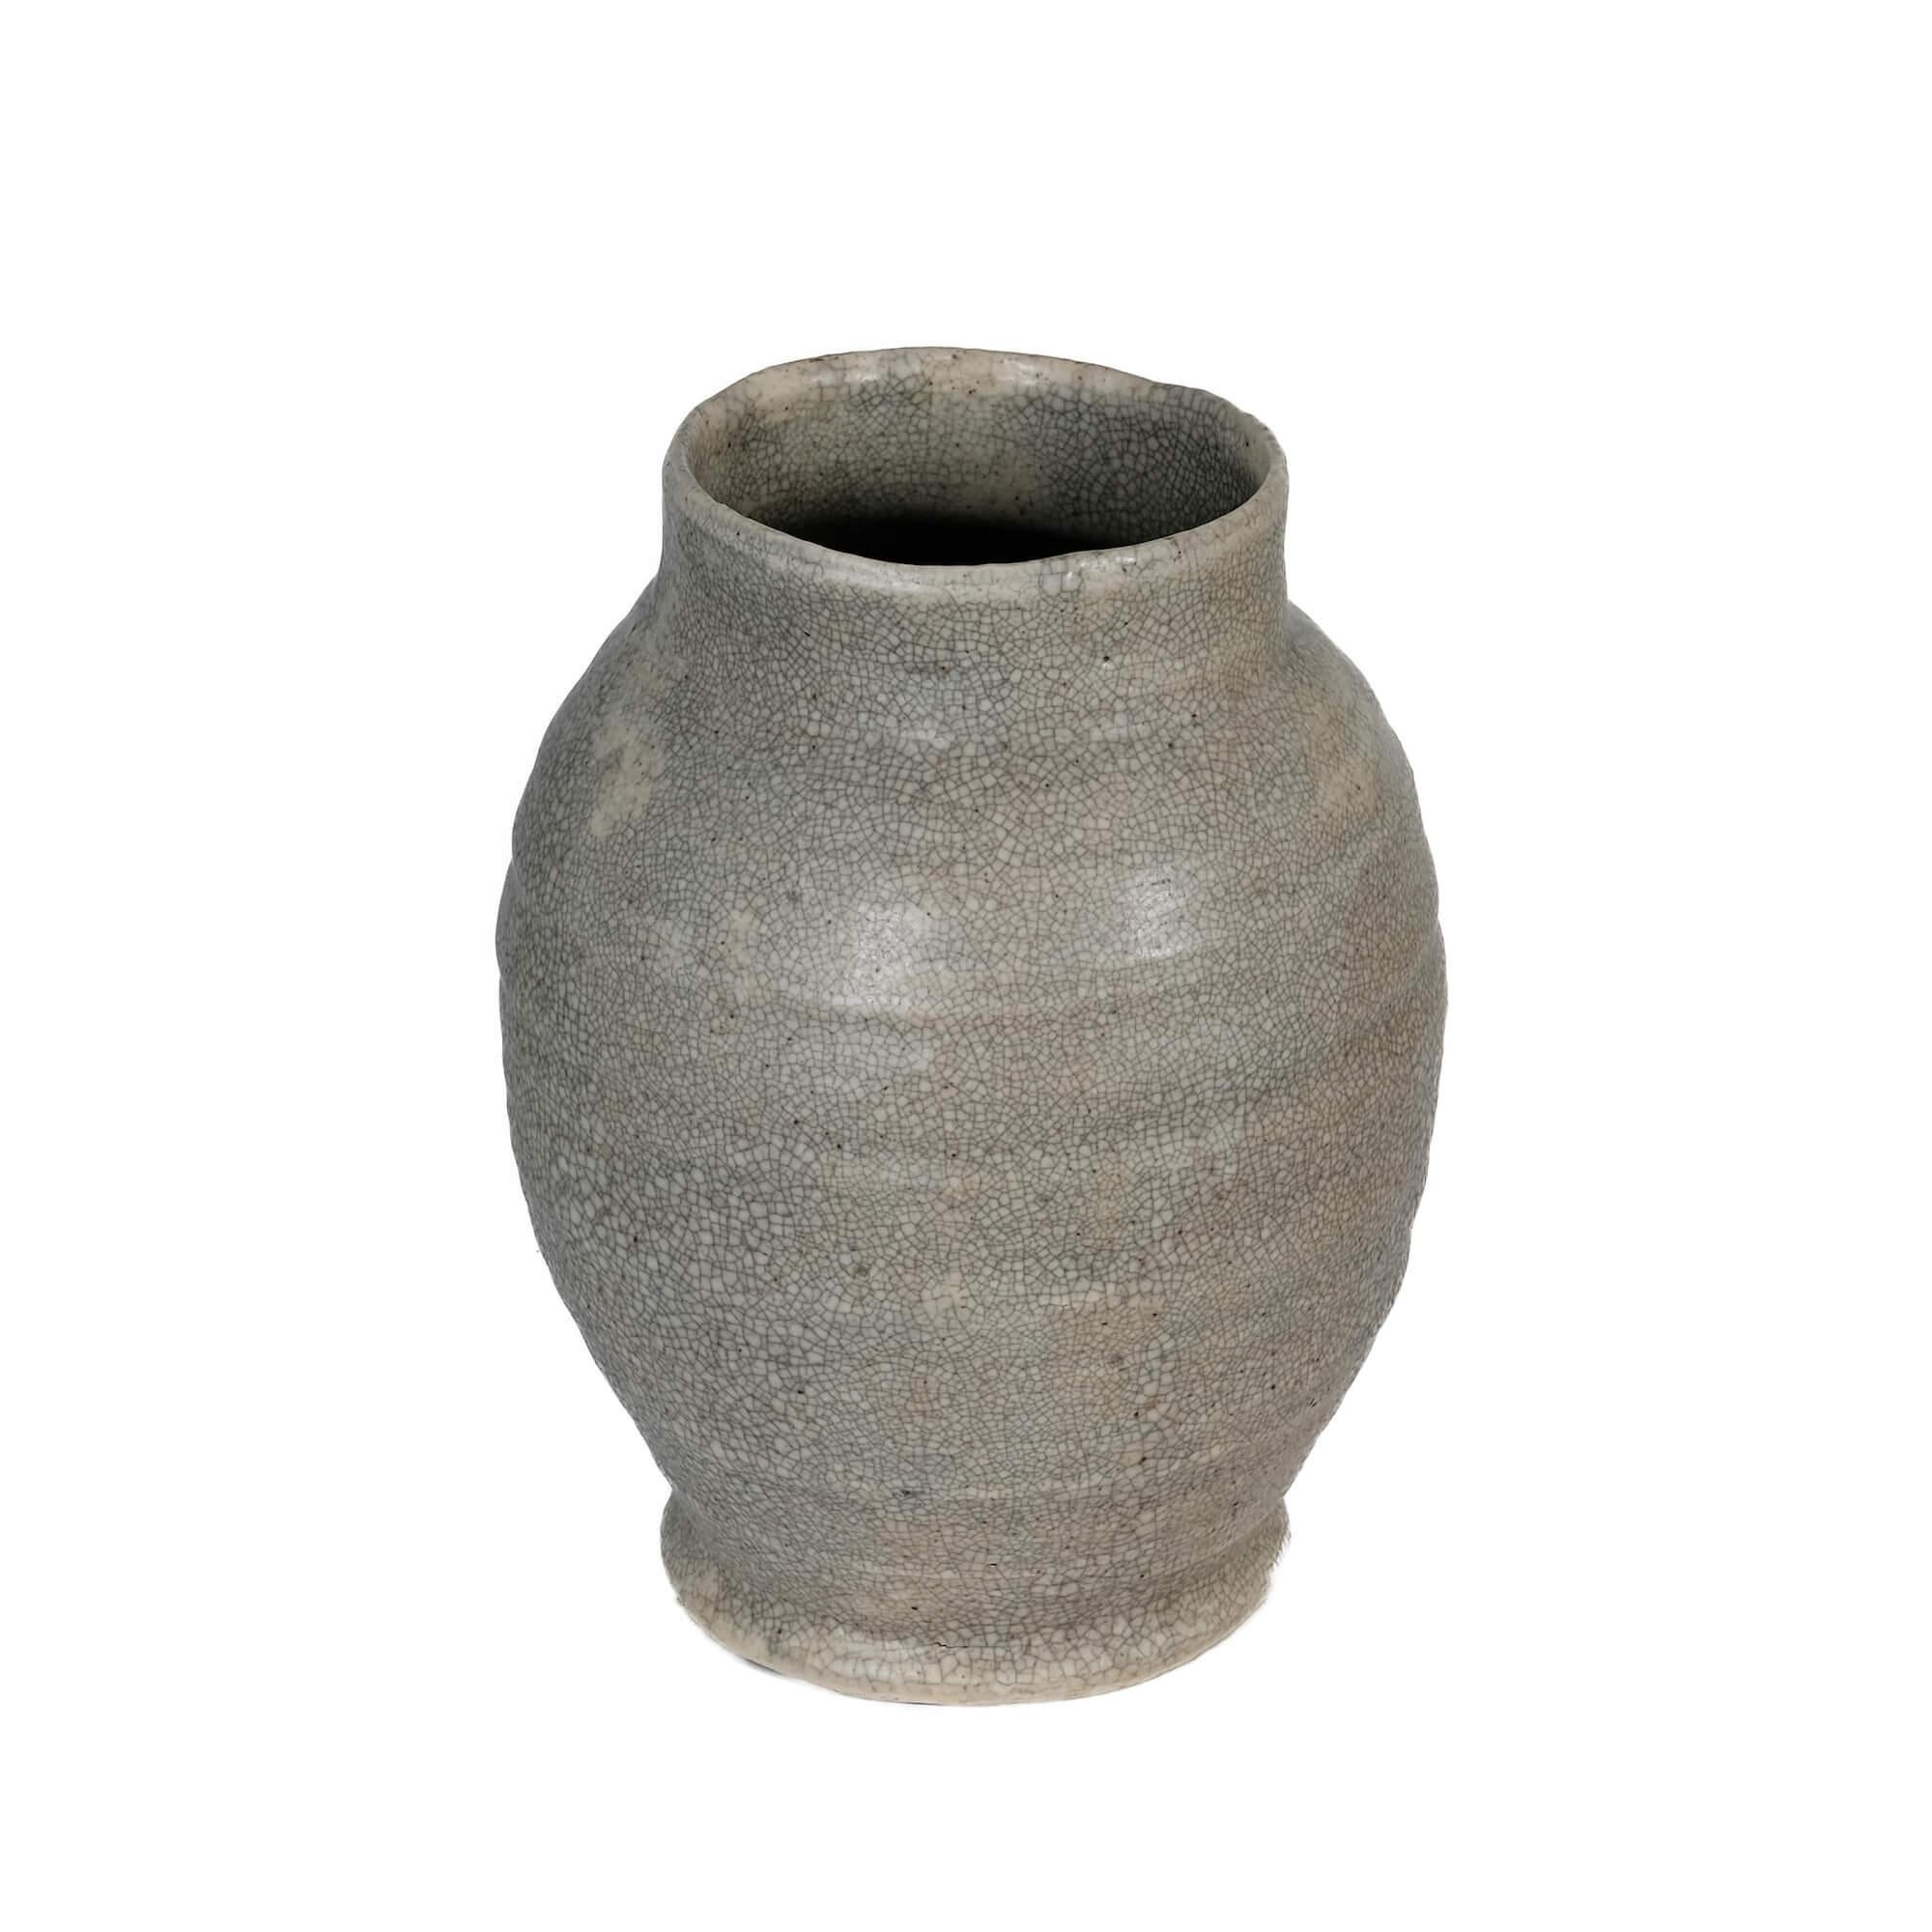 Cohiki Vetus vase III by Studio Cúze
Dimensions: W 20 x H 25.5 cm
Materials: ceramic

This rustic vase with its shape and contours is a perfect addition to your garden or balcony. Thanks to its size of 20 x 25.5cm, you have enough volume for a